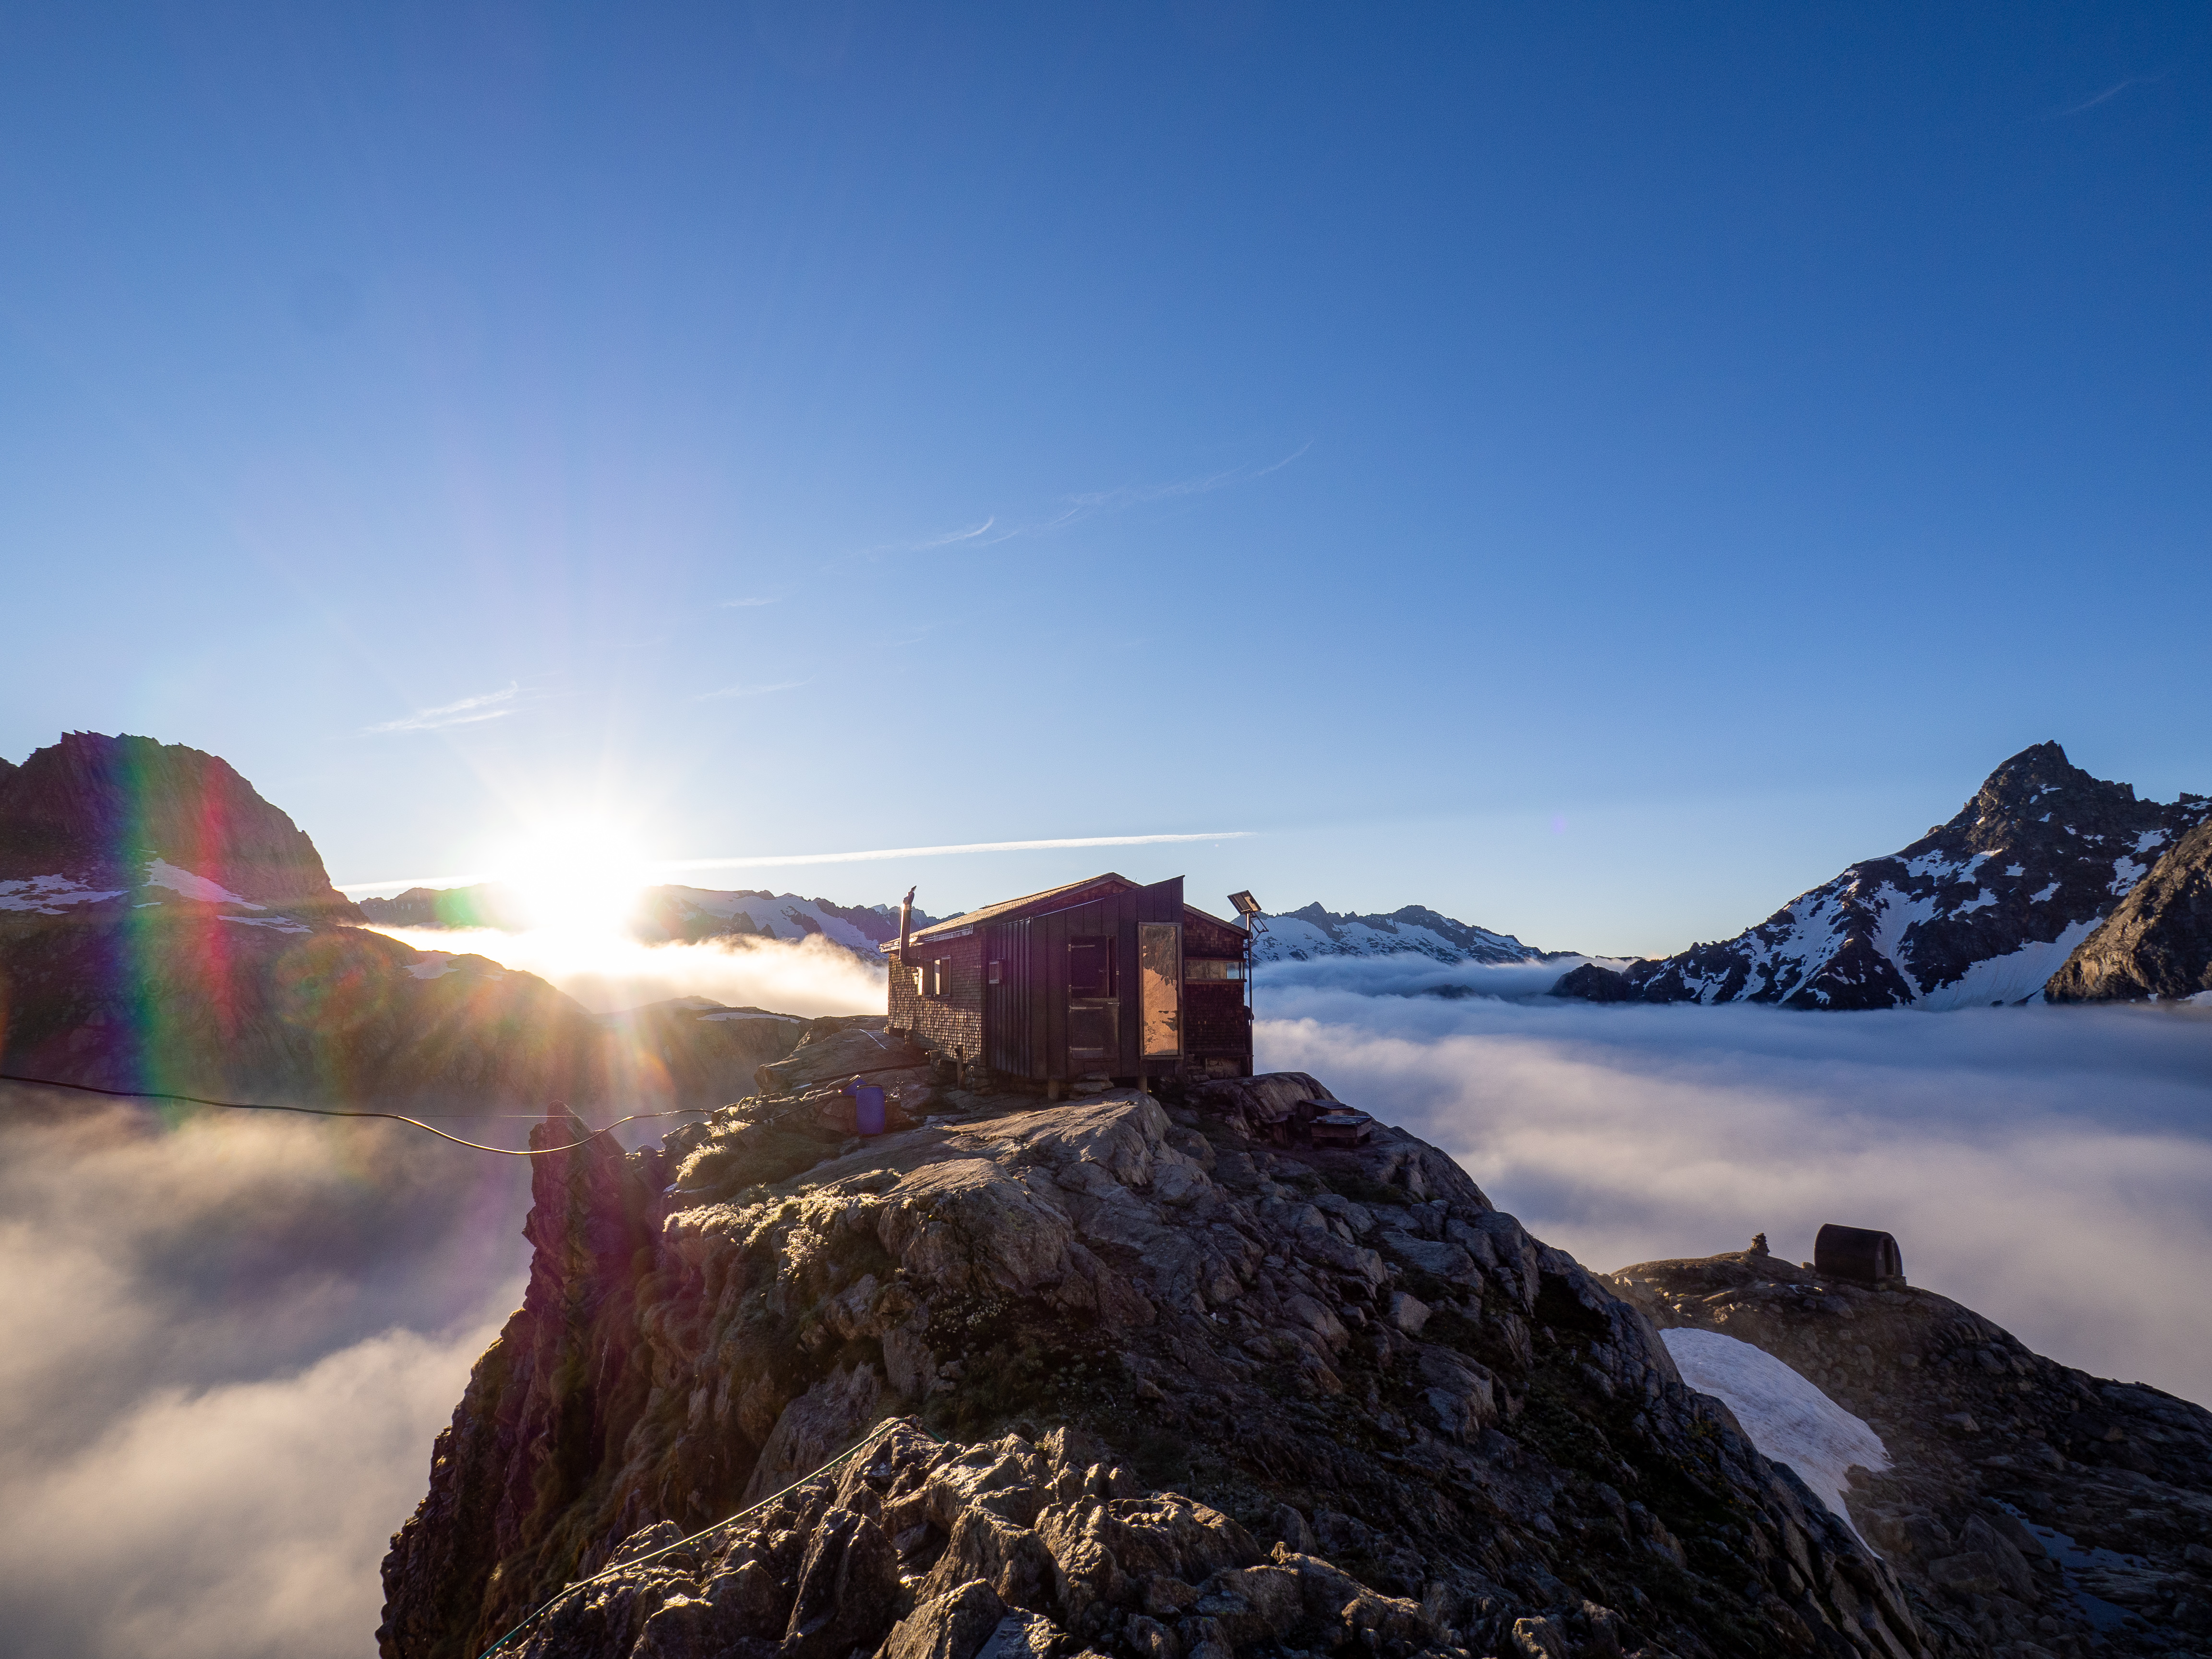 Sunrise with low-hanging clouds at the Gruebenhütte